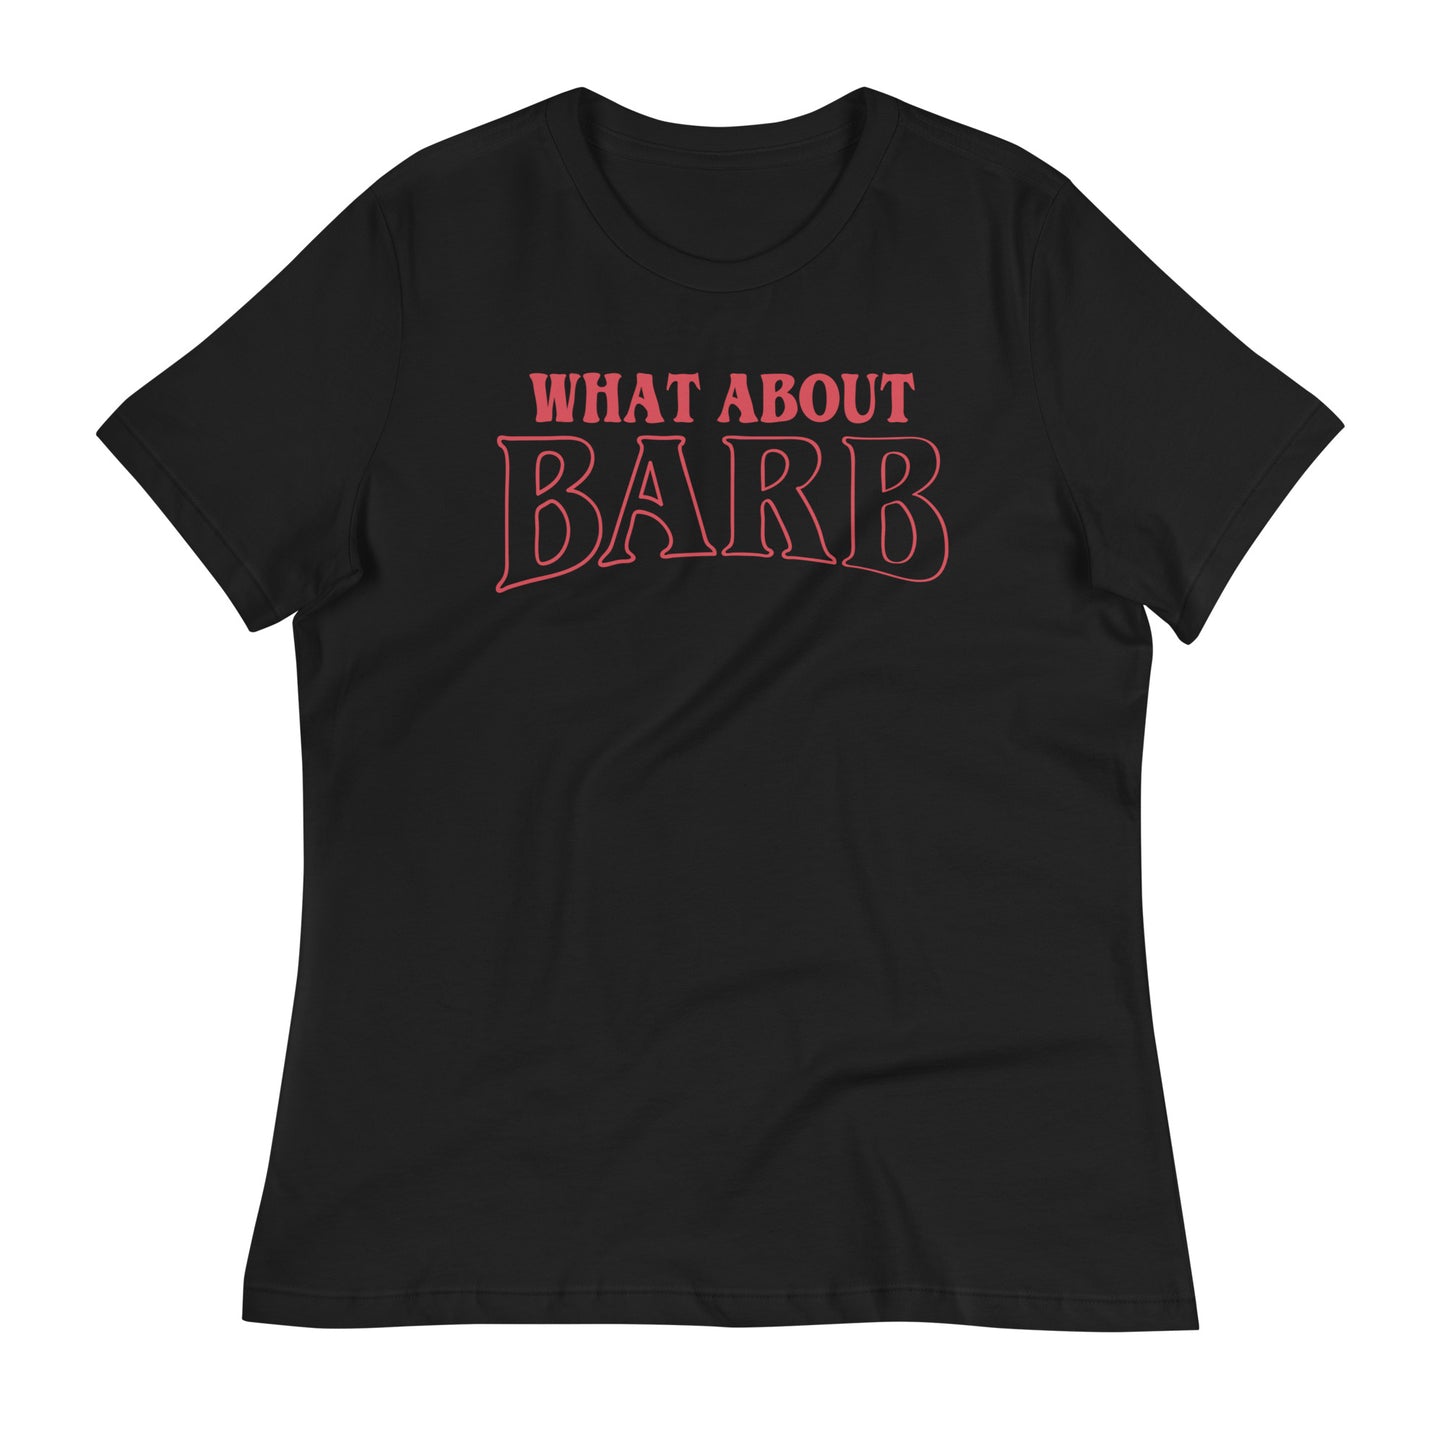 What About Barb? Women's Signature Tee